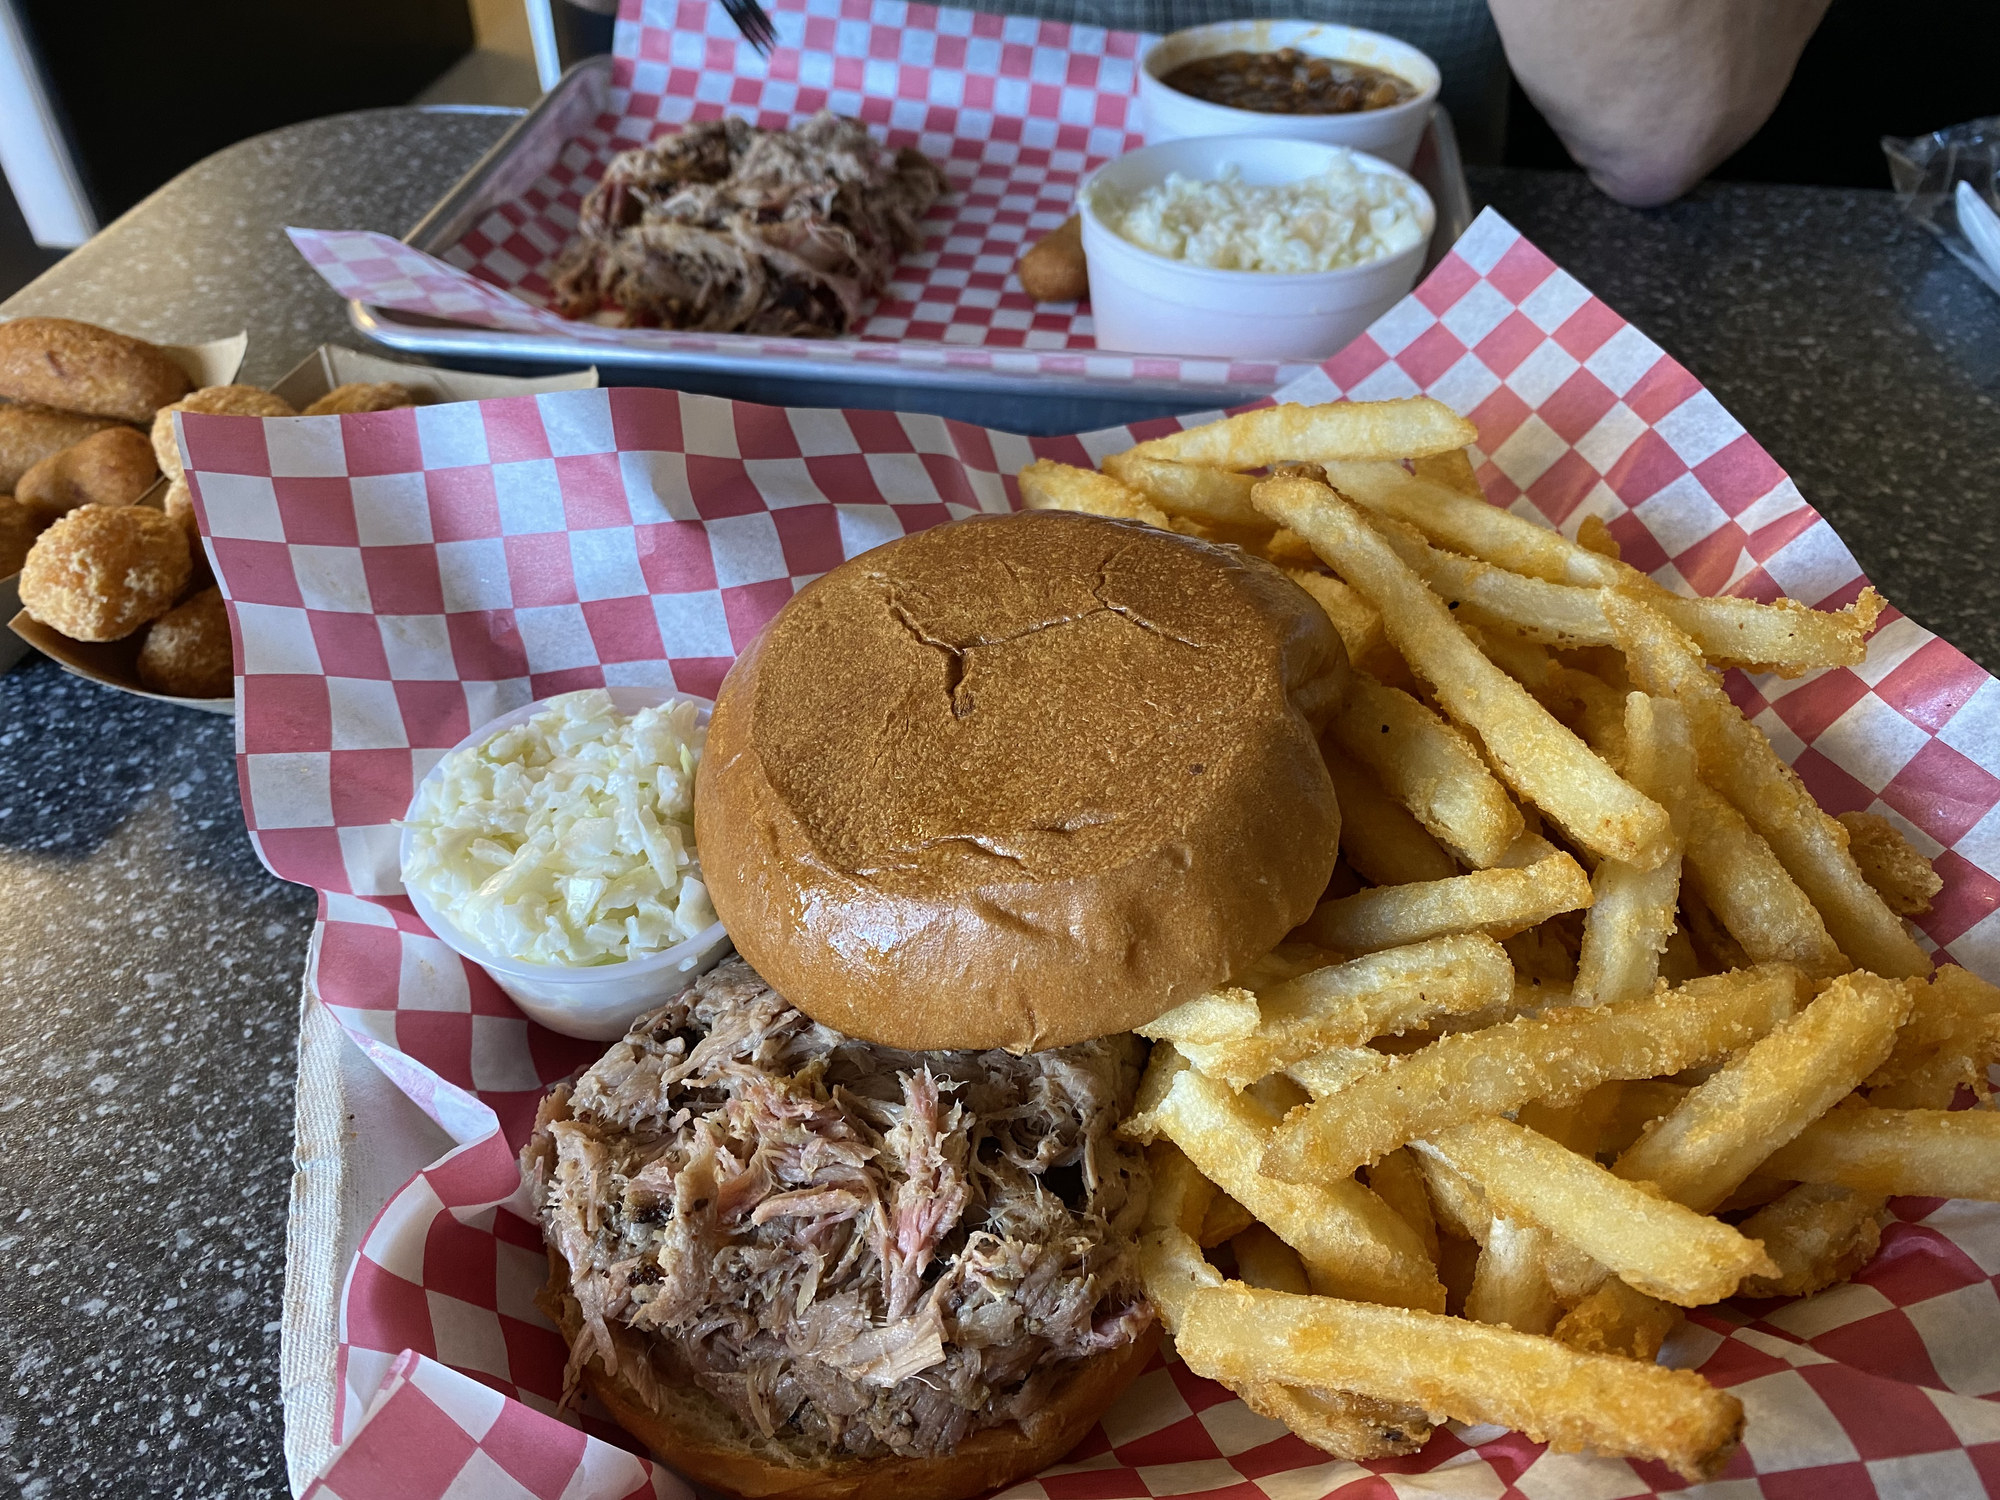 pulled pork sandwich, fries, and cole slaw